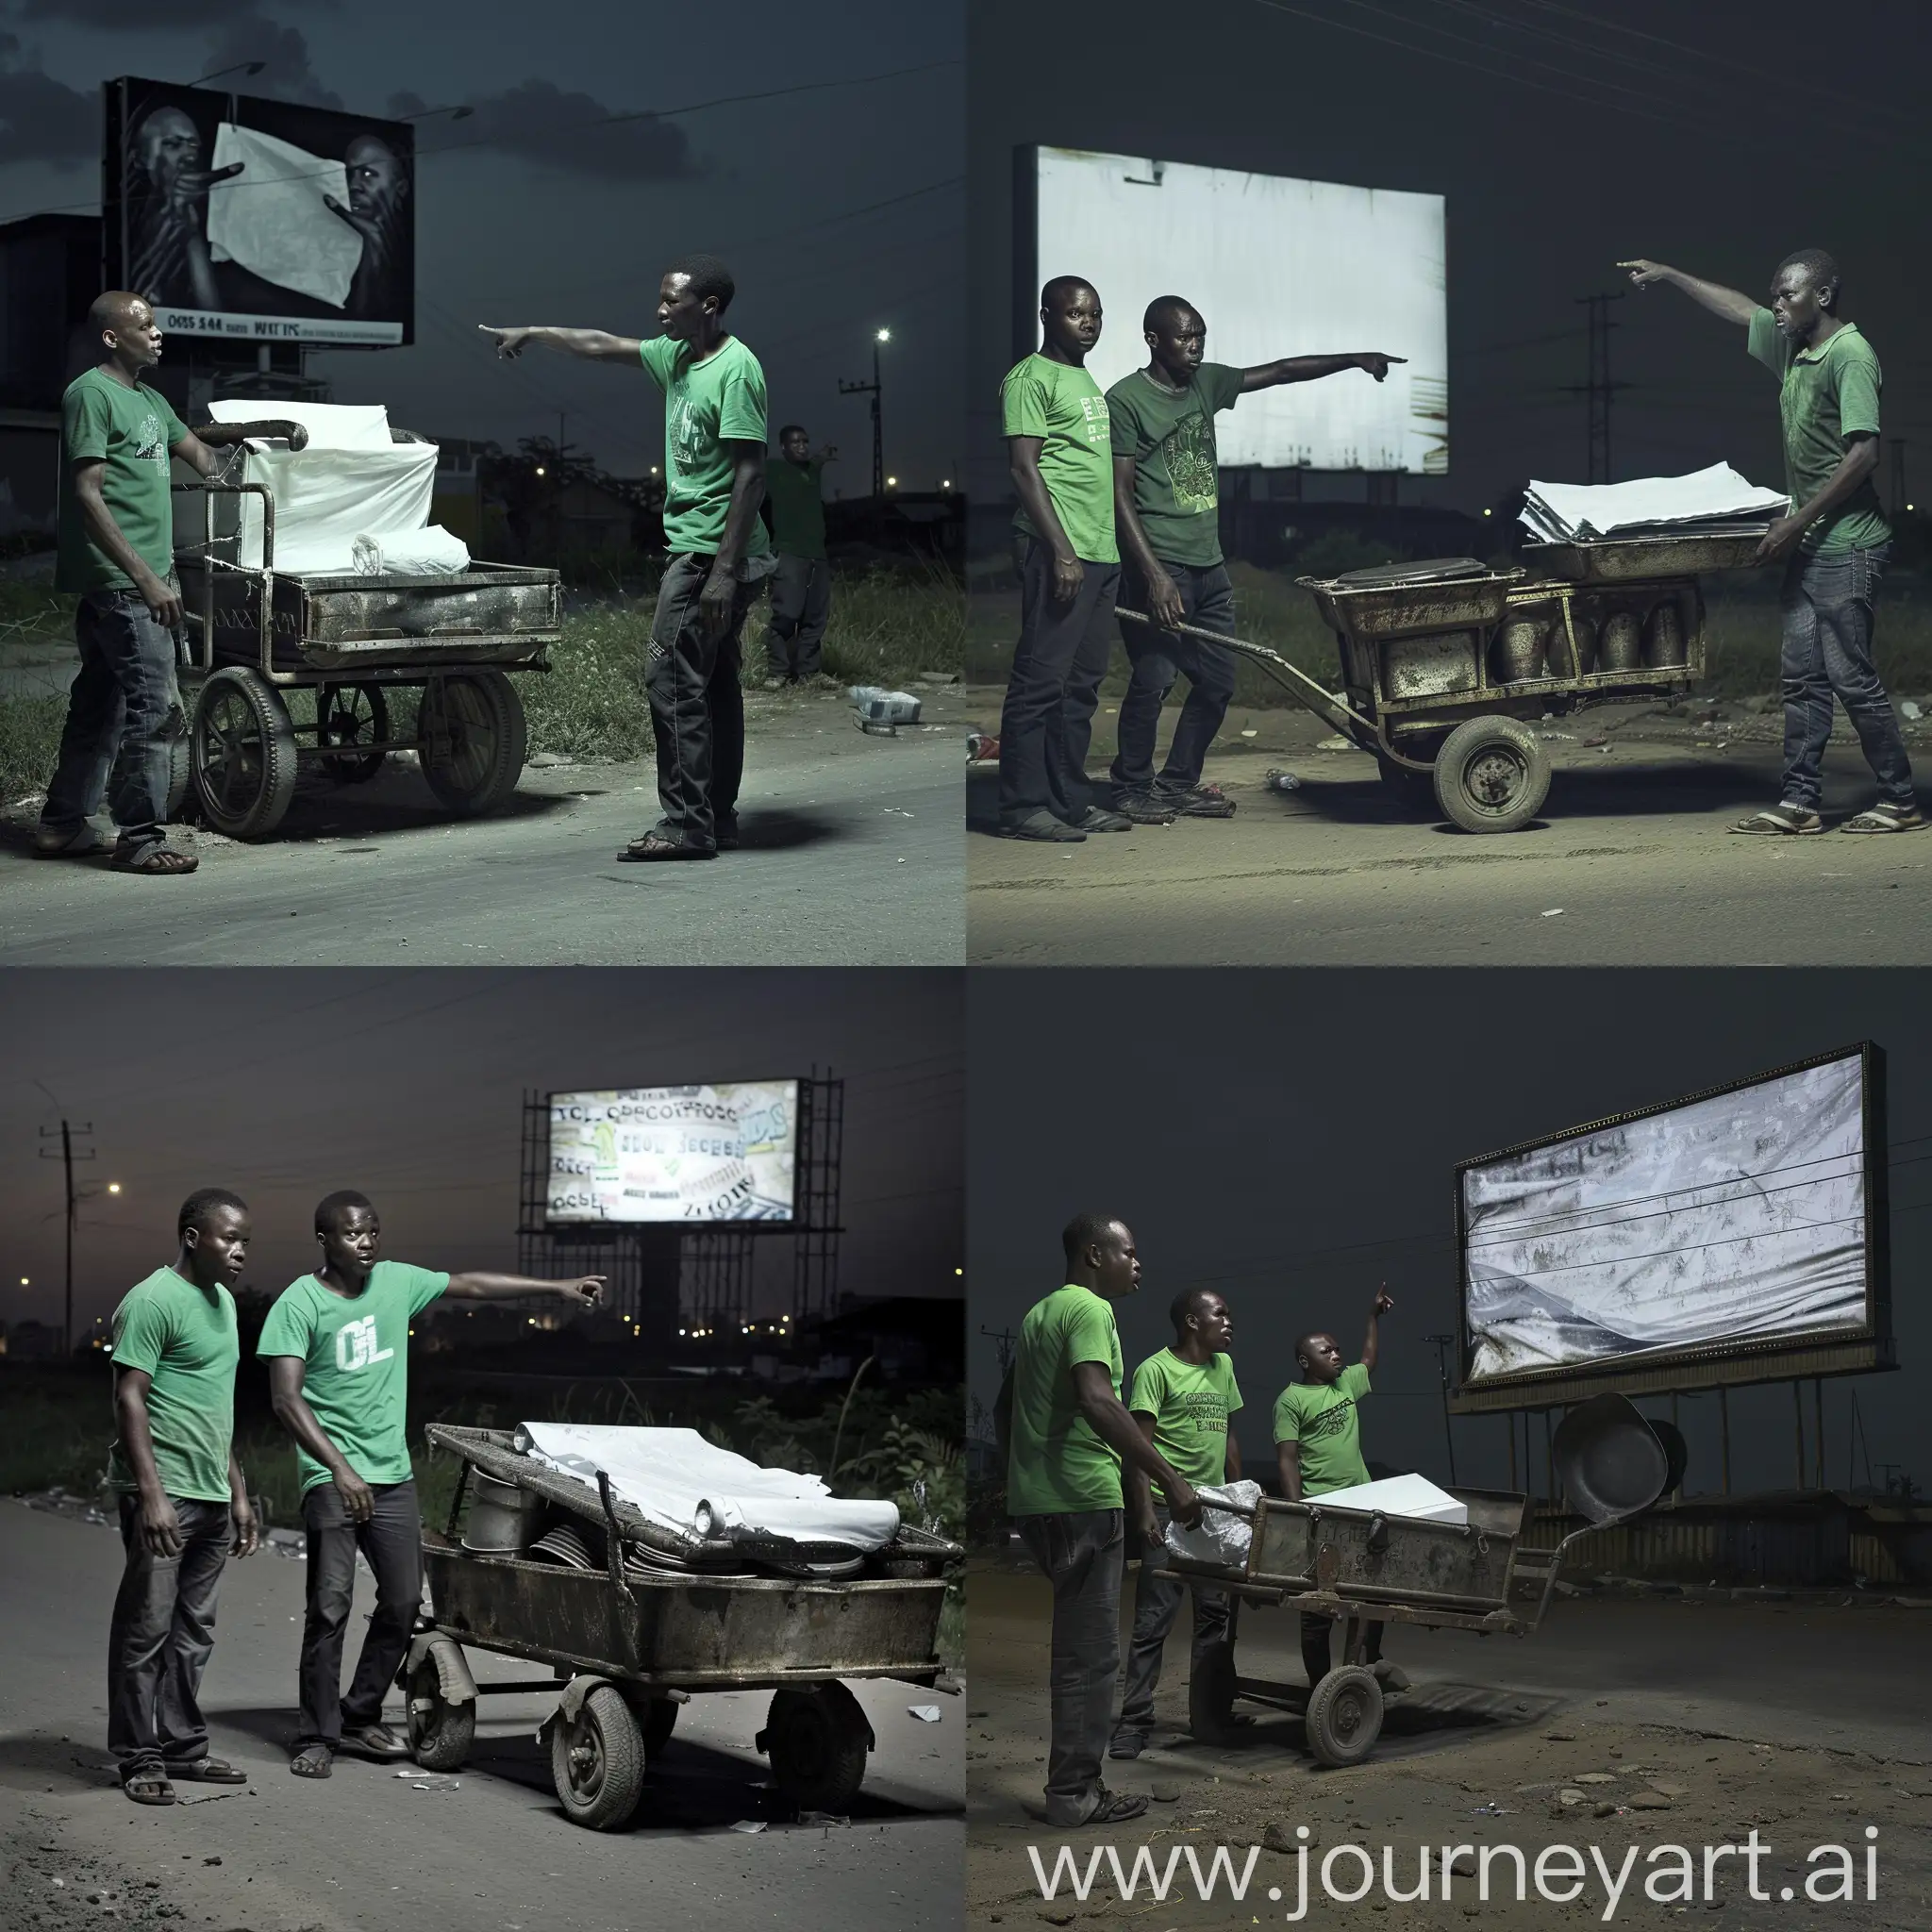 Create a night-time image of a rough-looking Nigerian pushtruck man. He is pushing a rickety cart on a Nigerian street. The cart is made of iron pans, inside the cart is one folded white flex material. Two men wearing identical green tshirts and black jeans trousers stand by the side of the pushtruck man.  One of them points to their front. In the background is a billboard, empty and devoid of its flex material.